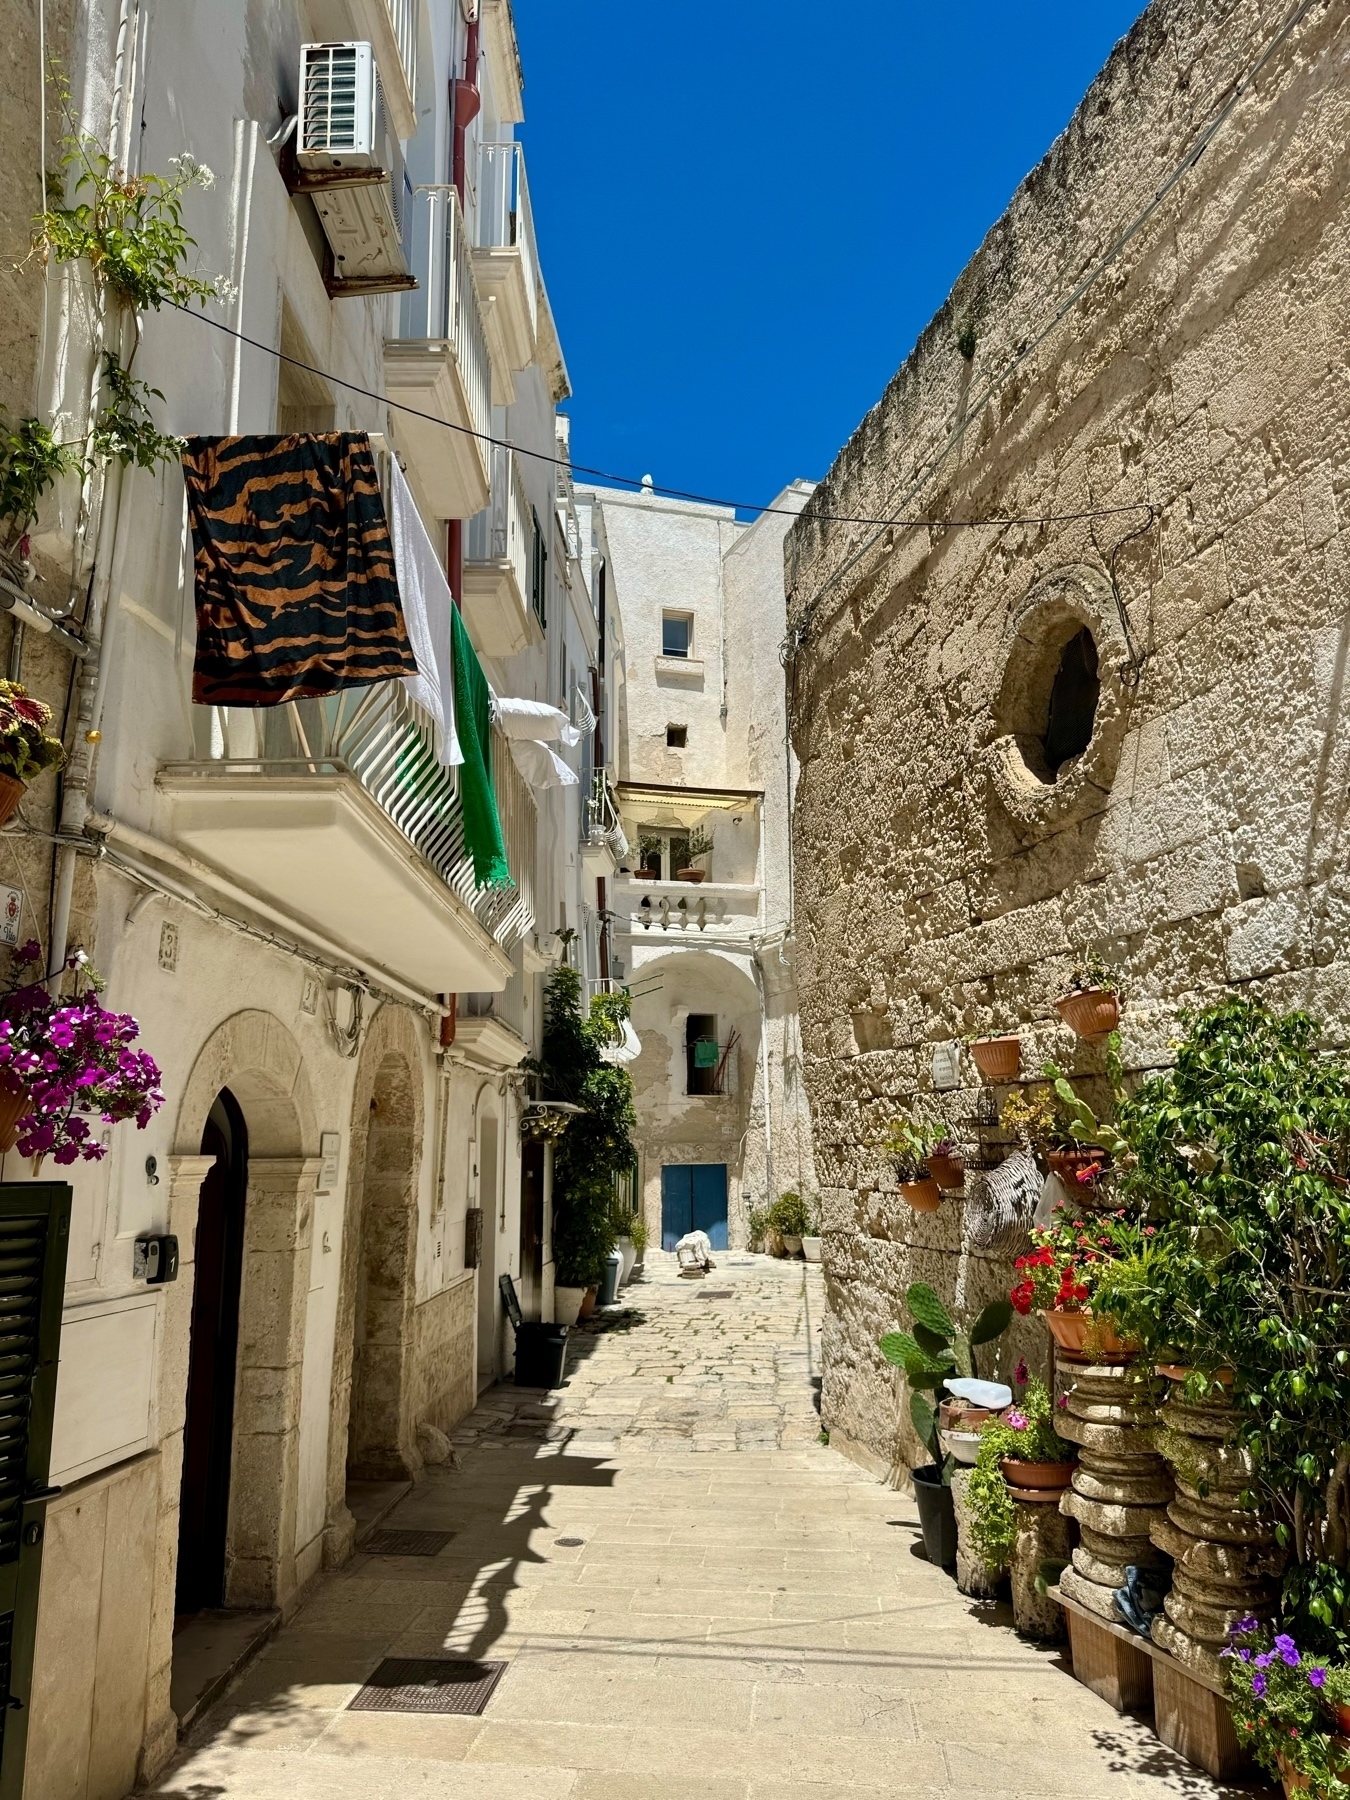 A narrow, sunlit alleyway in an old town with whitewashed buildings and stone walls. Brightly colored flowers and plants decorate the walkway, while laundry hangs from balconies. The clear blue sky contrasts with the rustic architecture. 